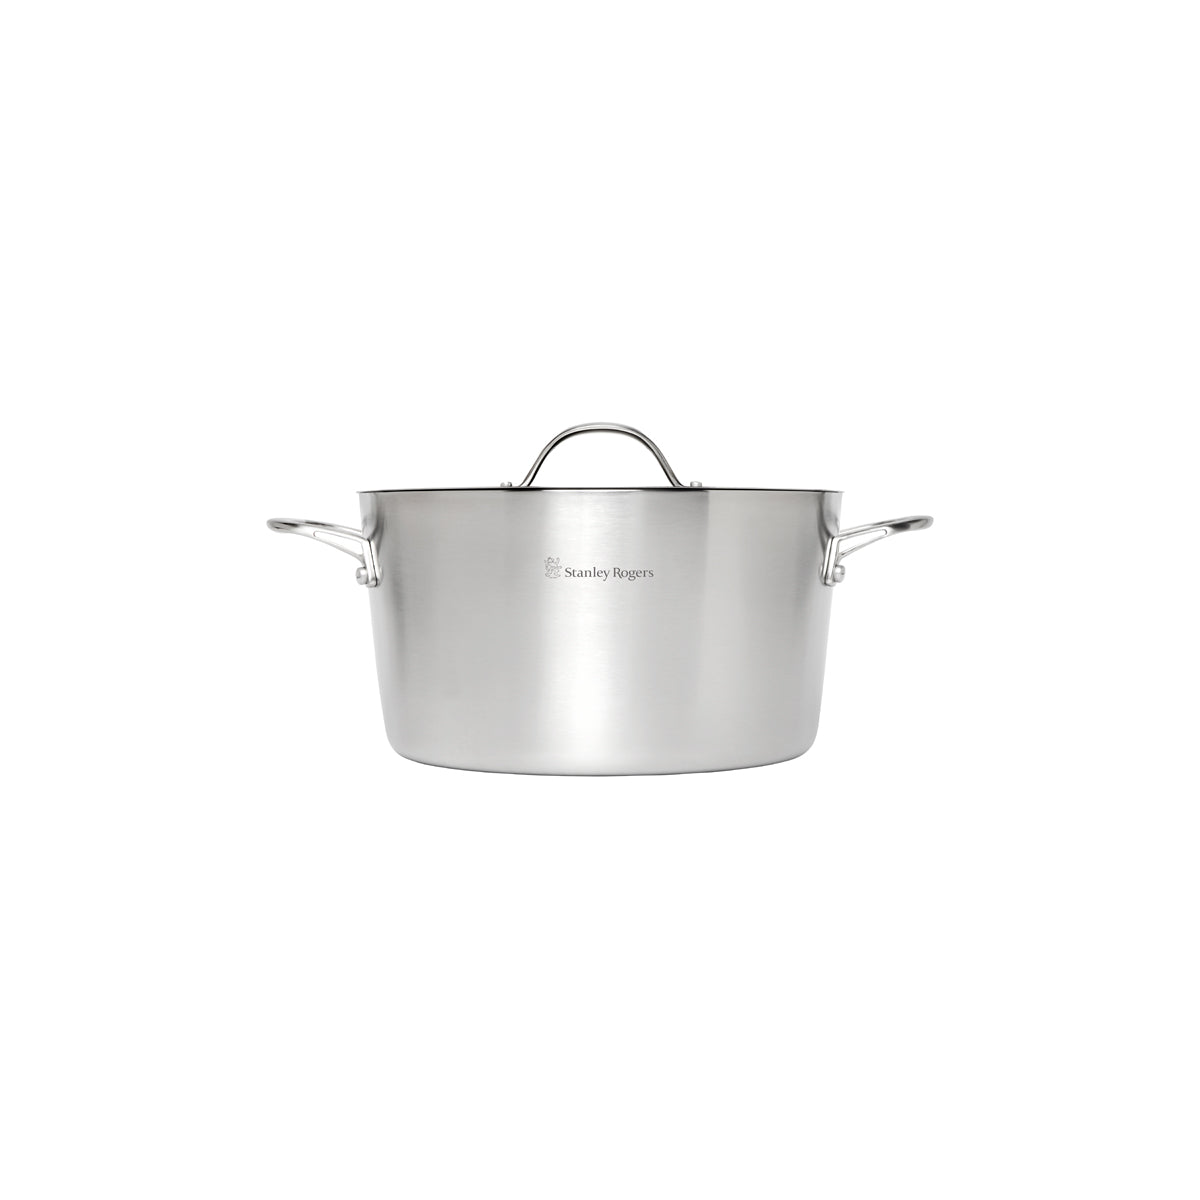 SR42307 Stanley Rogers Conical Tri Ply Casserole 240mm/4500ml Tomkin Australia Hospitality Supplies